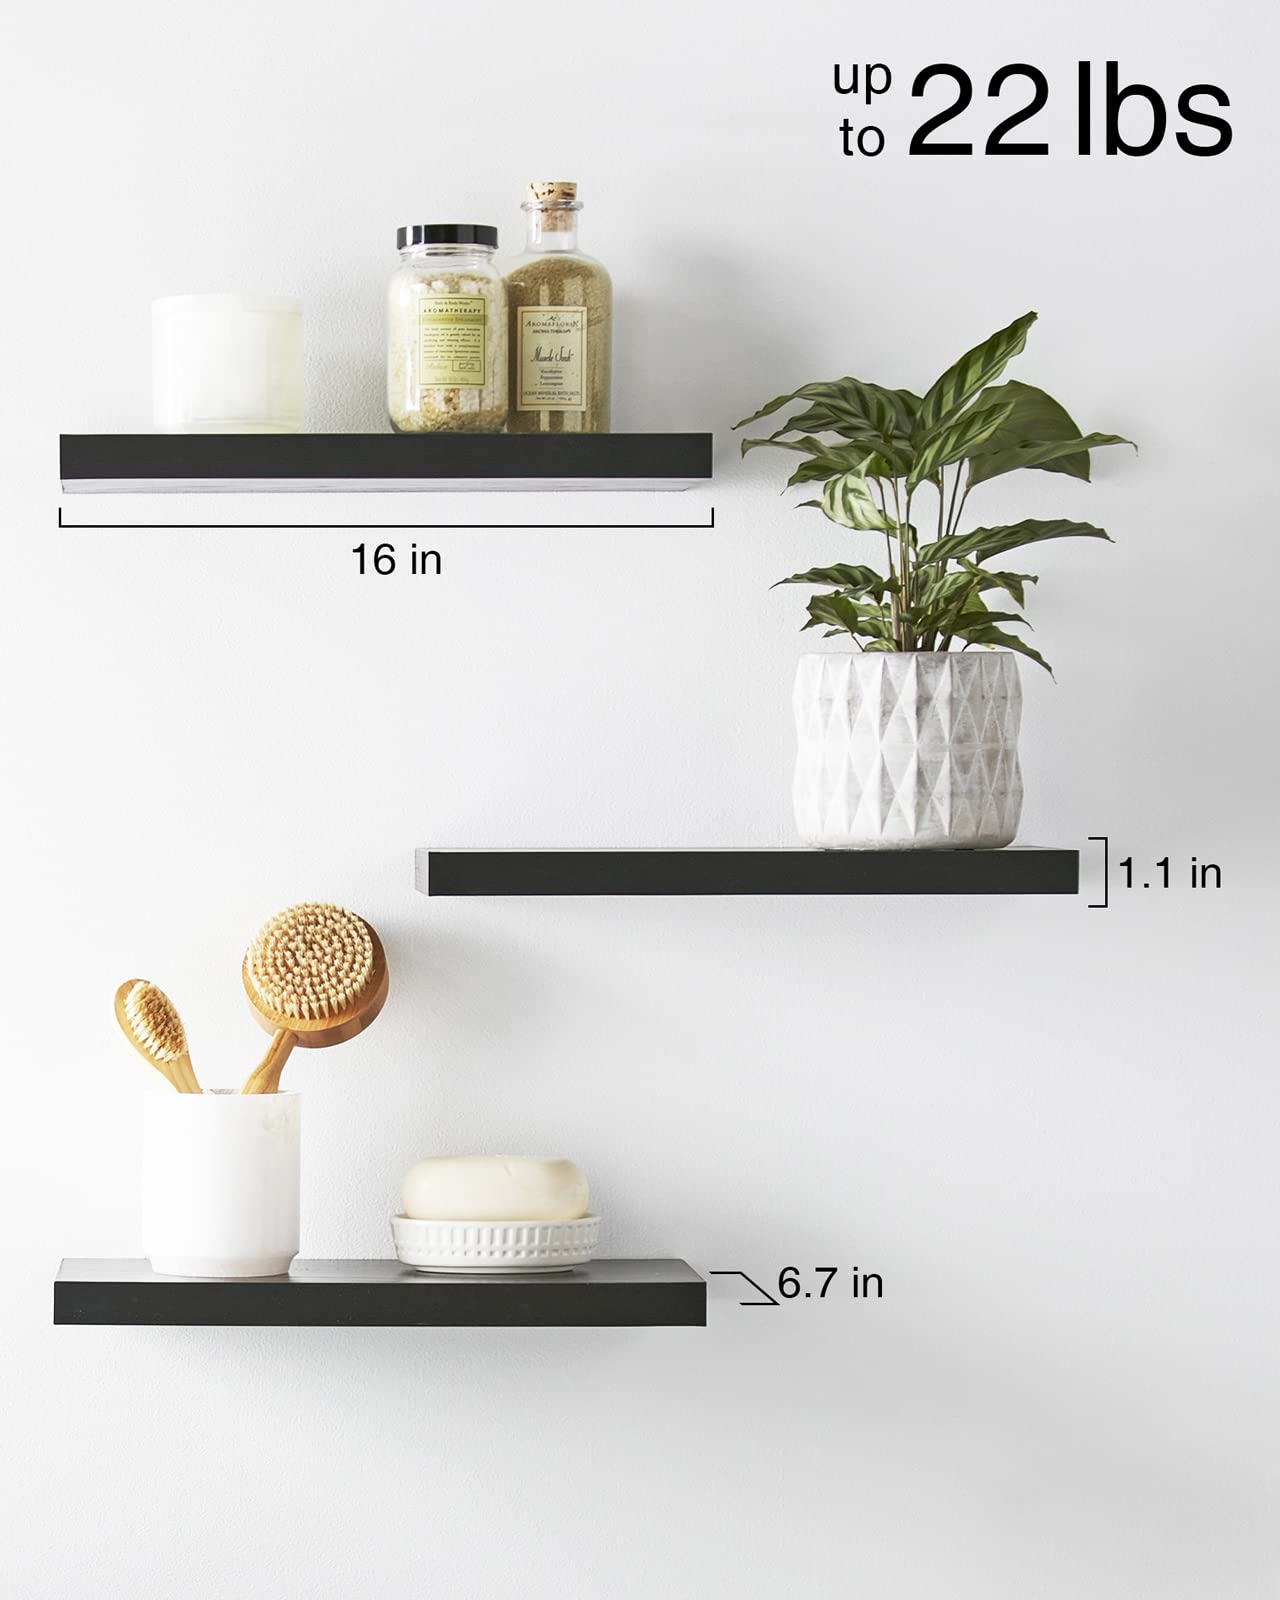 Floating Shelves, Wall Mounted Rustic Wood Shelves for Bathroom, Bedroom, Living Room, Kitchen, Small Hanging Shelf for Books/Storage/Room Decor with 22lbs Capacity (Black, Set of 3, 16in)